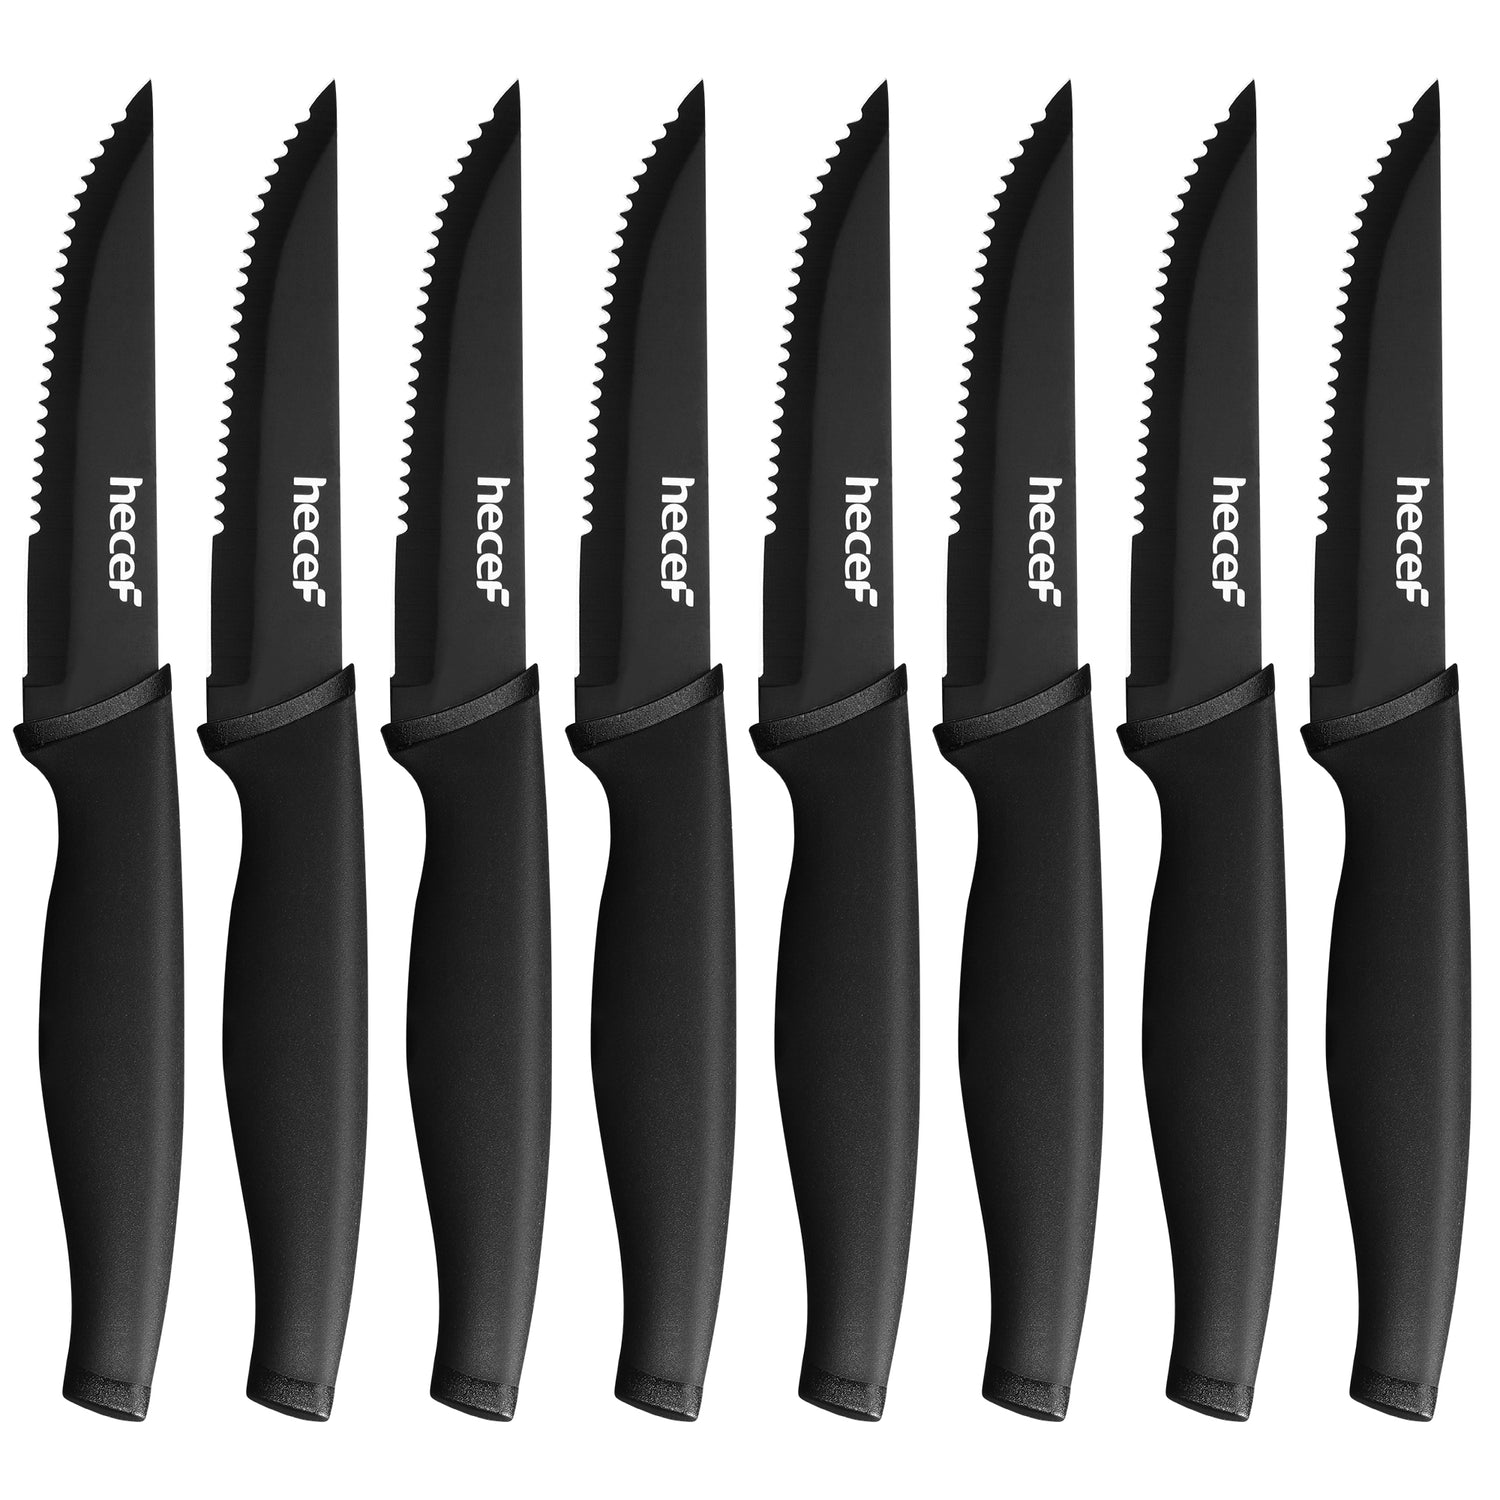 Hecef 14 Pcs Kitchen Knife Block Set, High Carbon Stainless Steel Cutlery  Set with 6 Steak Knives